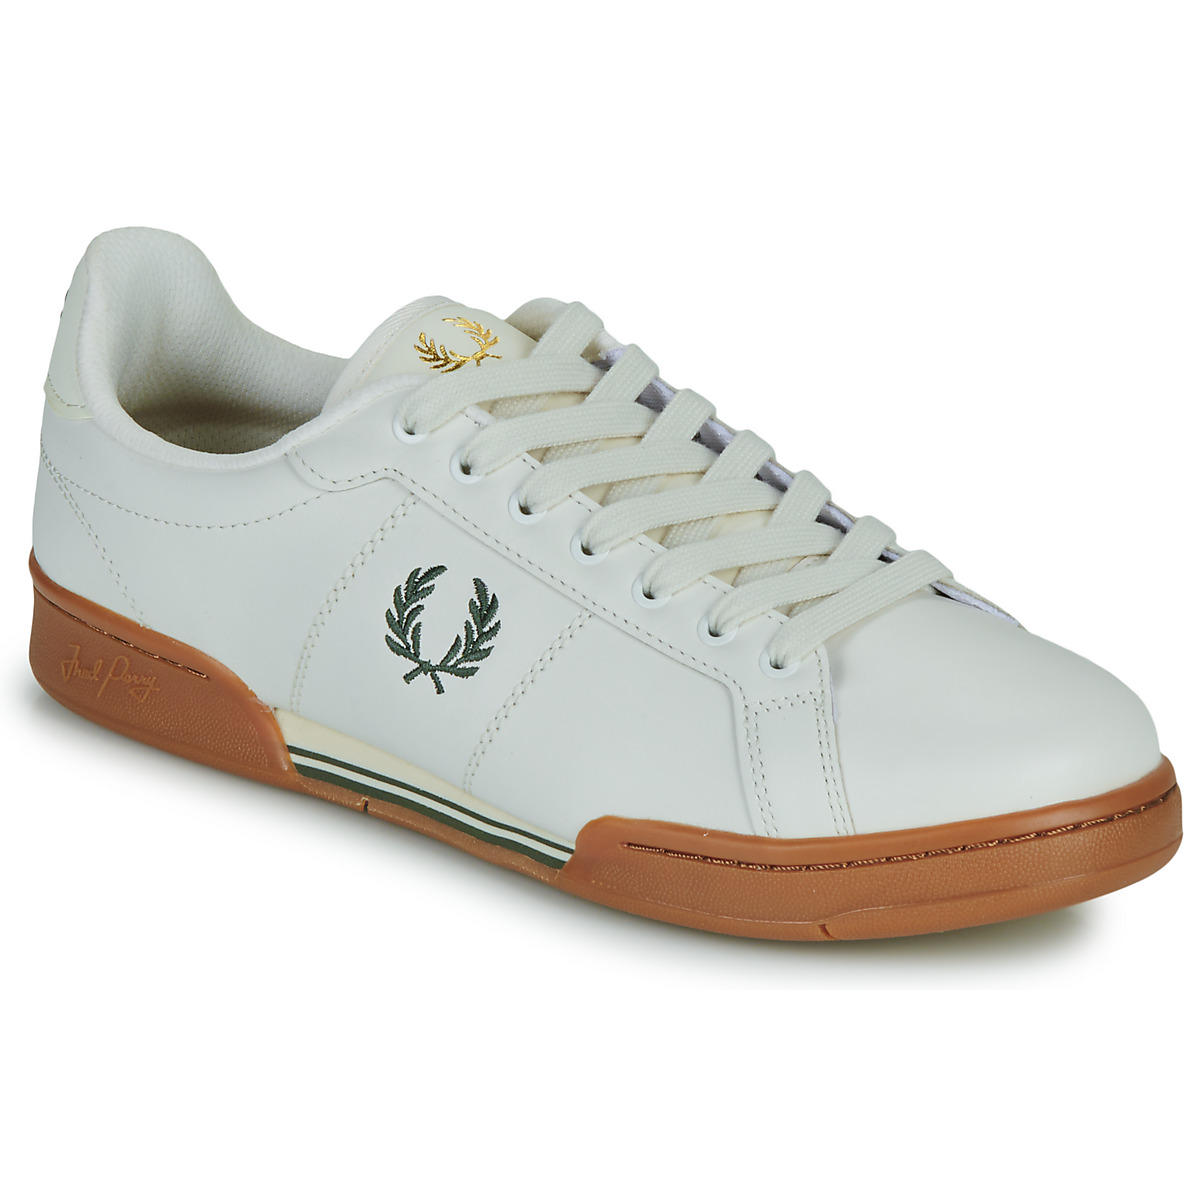 Xαμηλά Sneakers Fred Perry B722 LEATHER